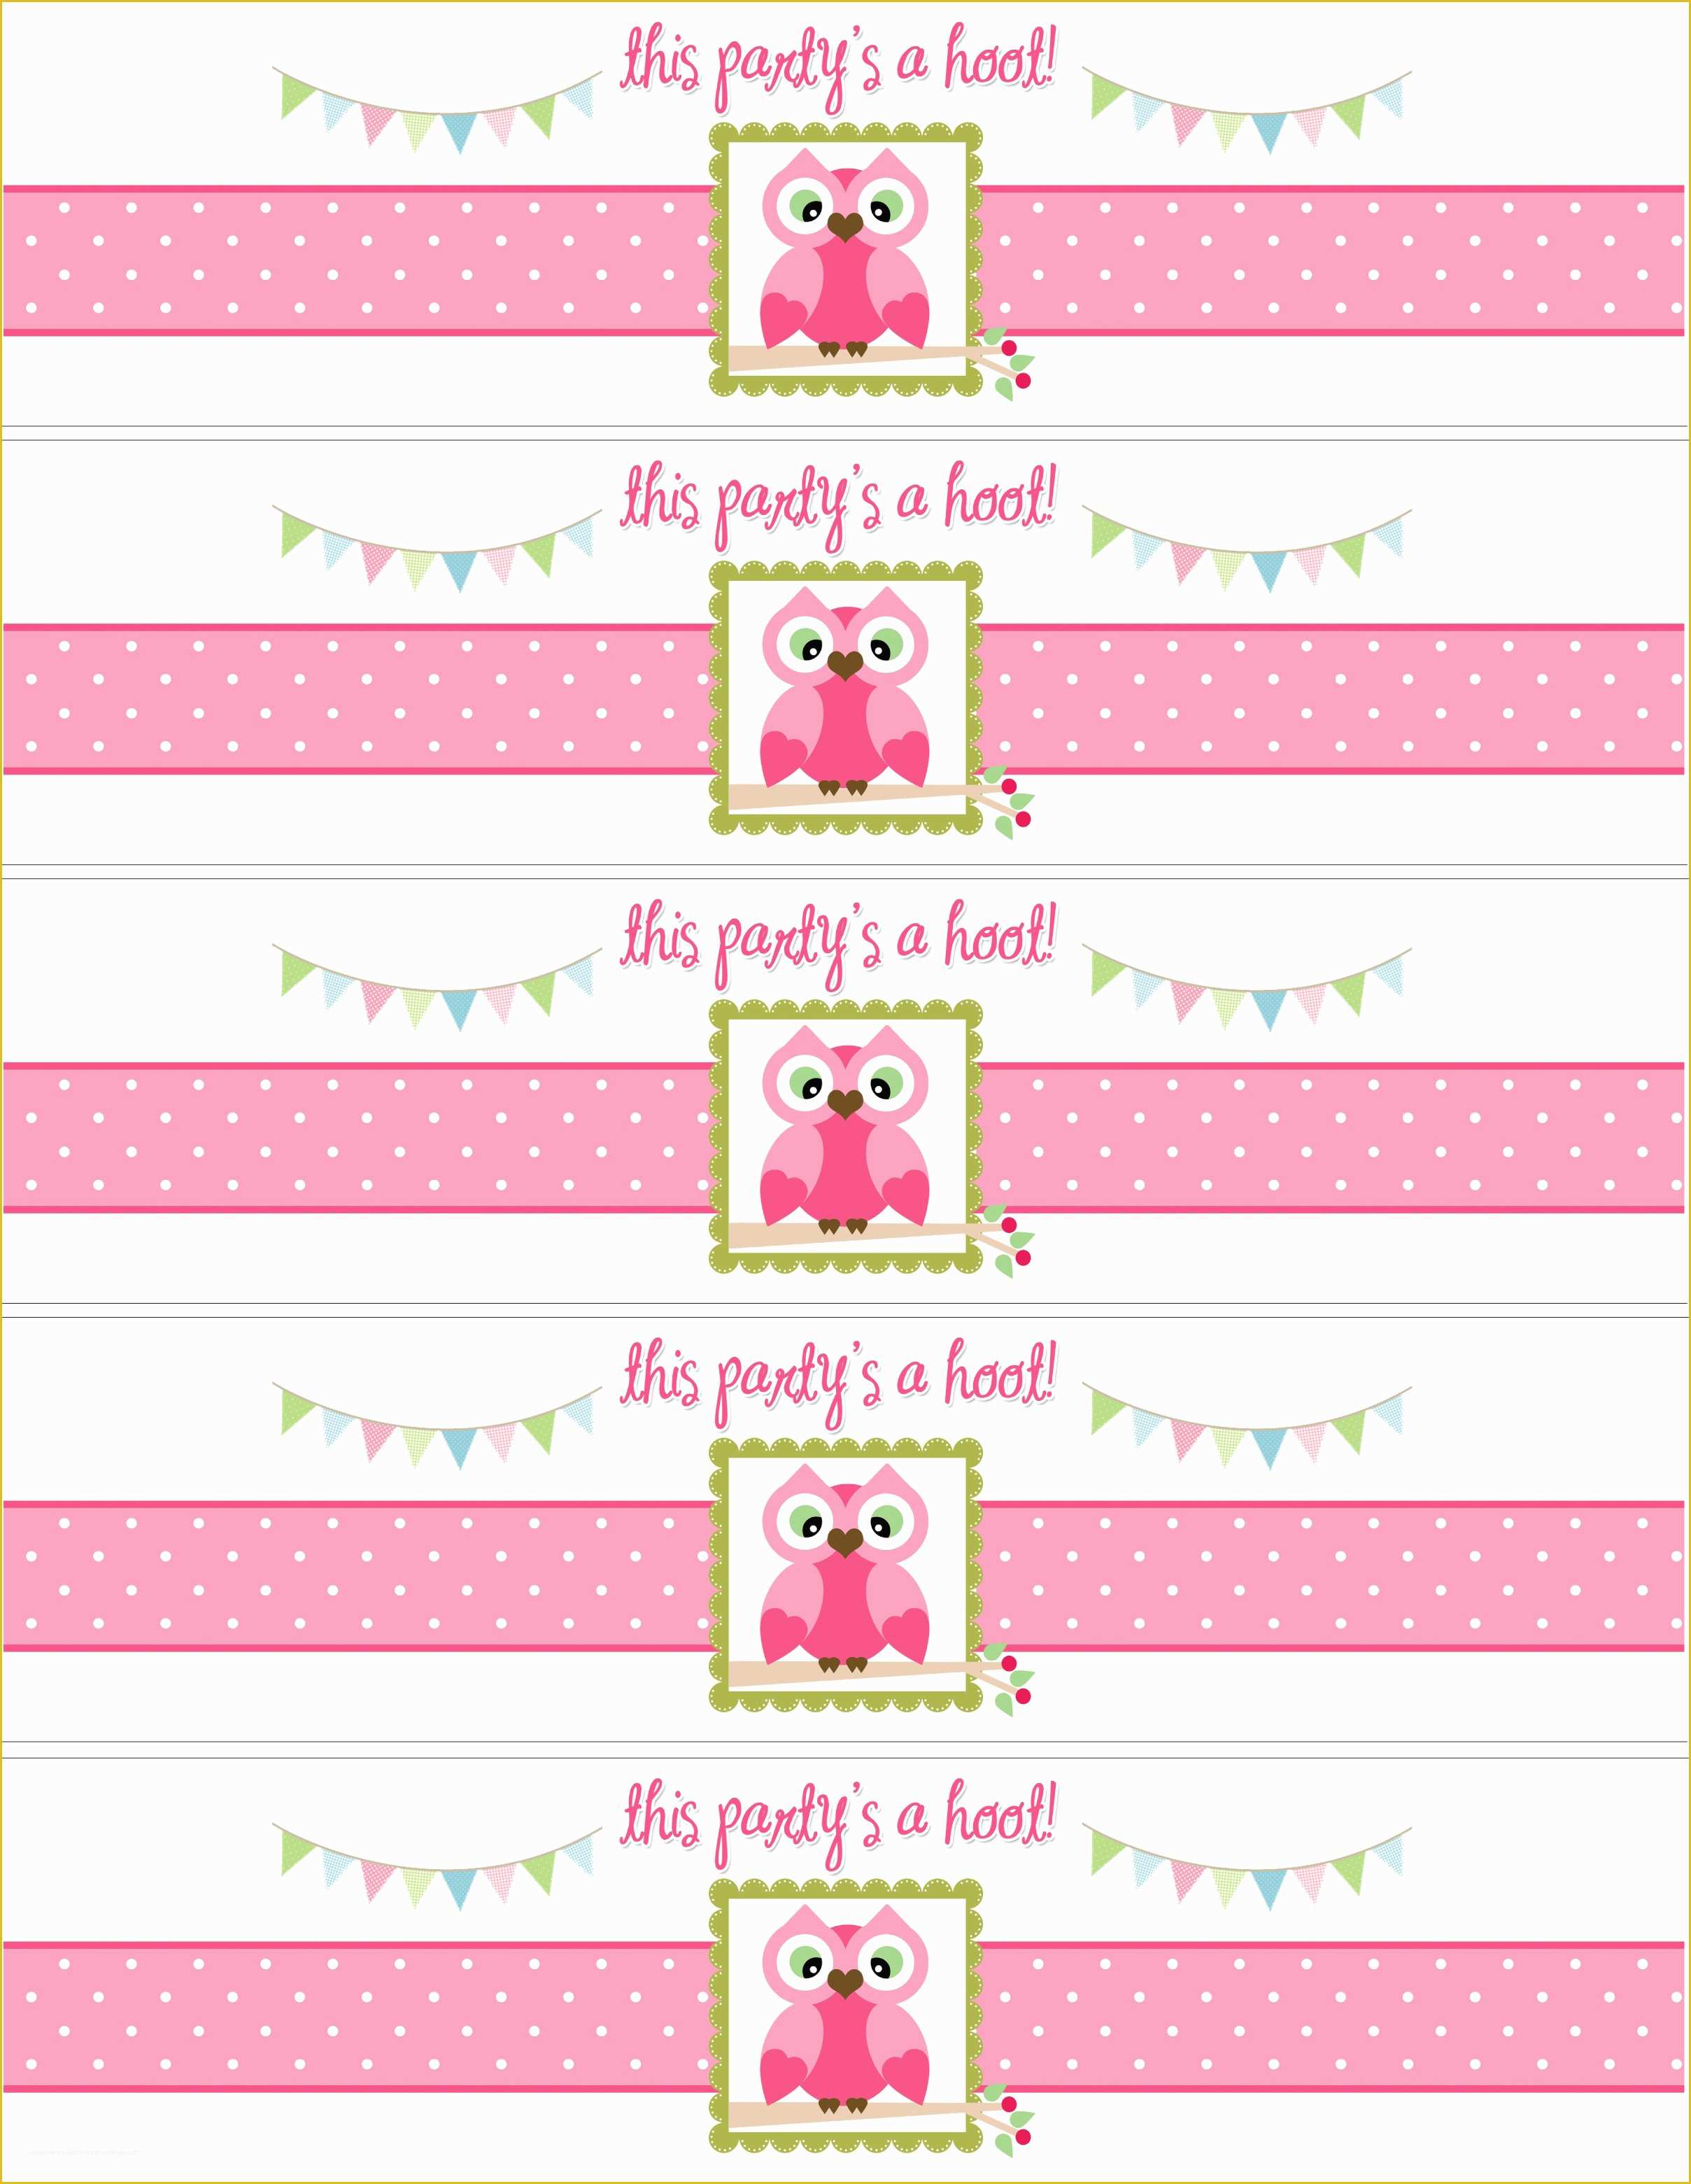 Free Printable Water Bottle Label Template Of Owl Birthday Party with Free Printables How to Nest for